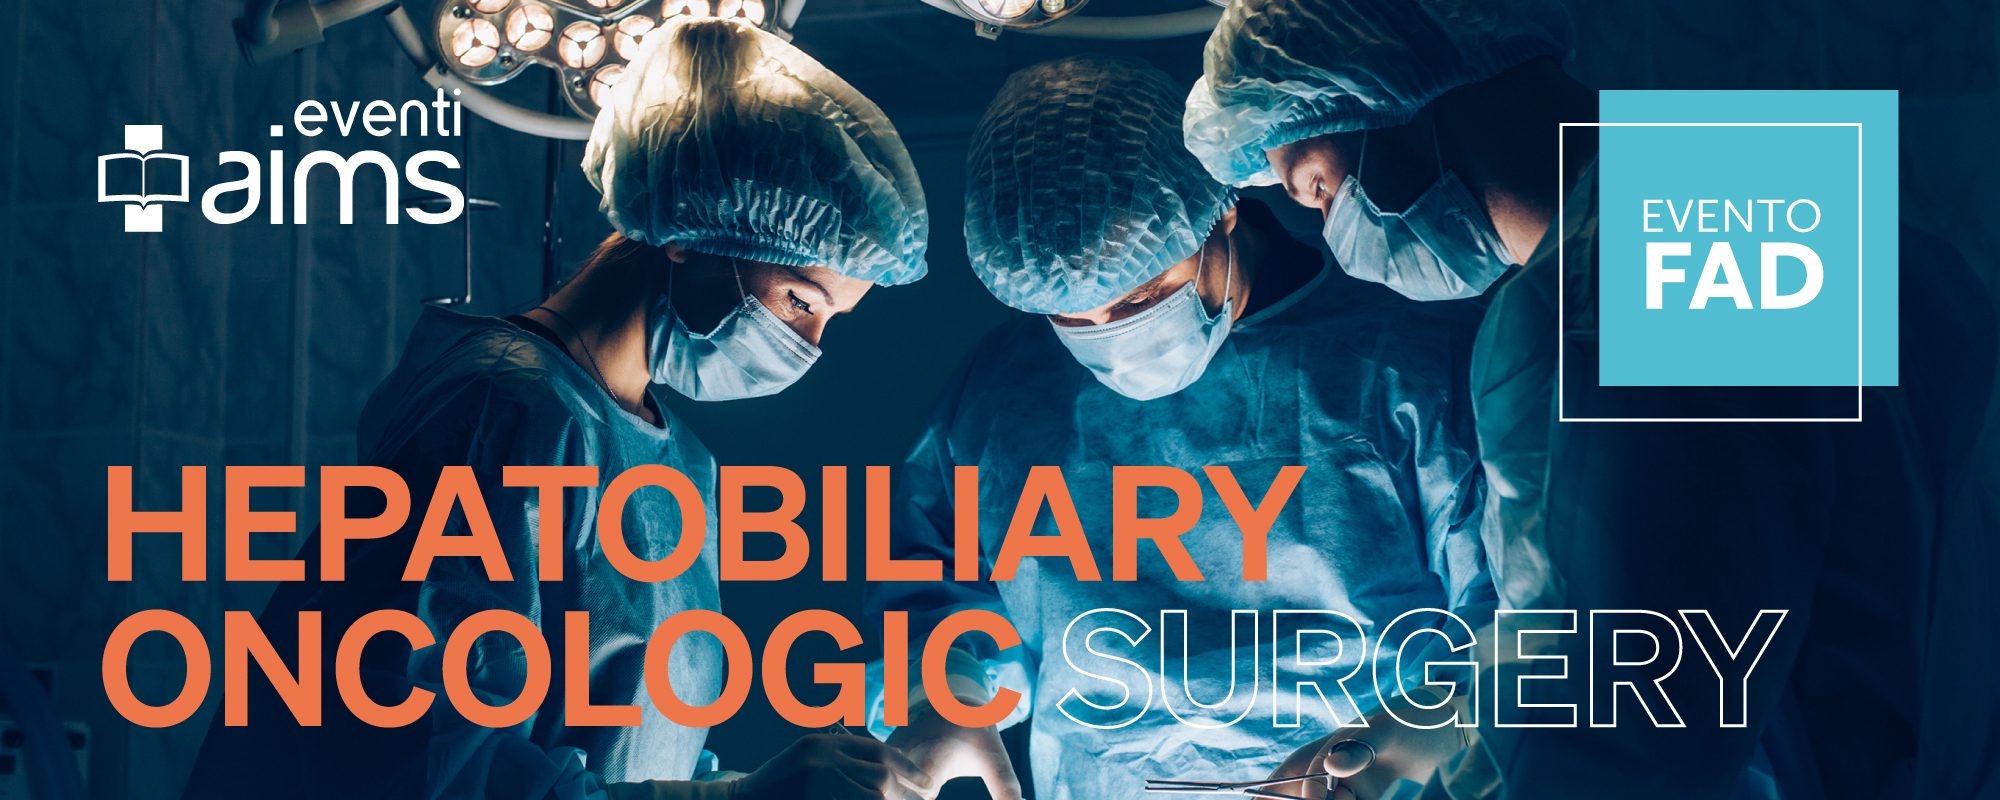 Visual-sito-SP-hepatobiliary-oncologic-surgery